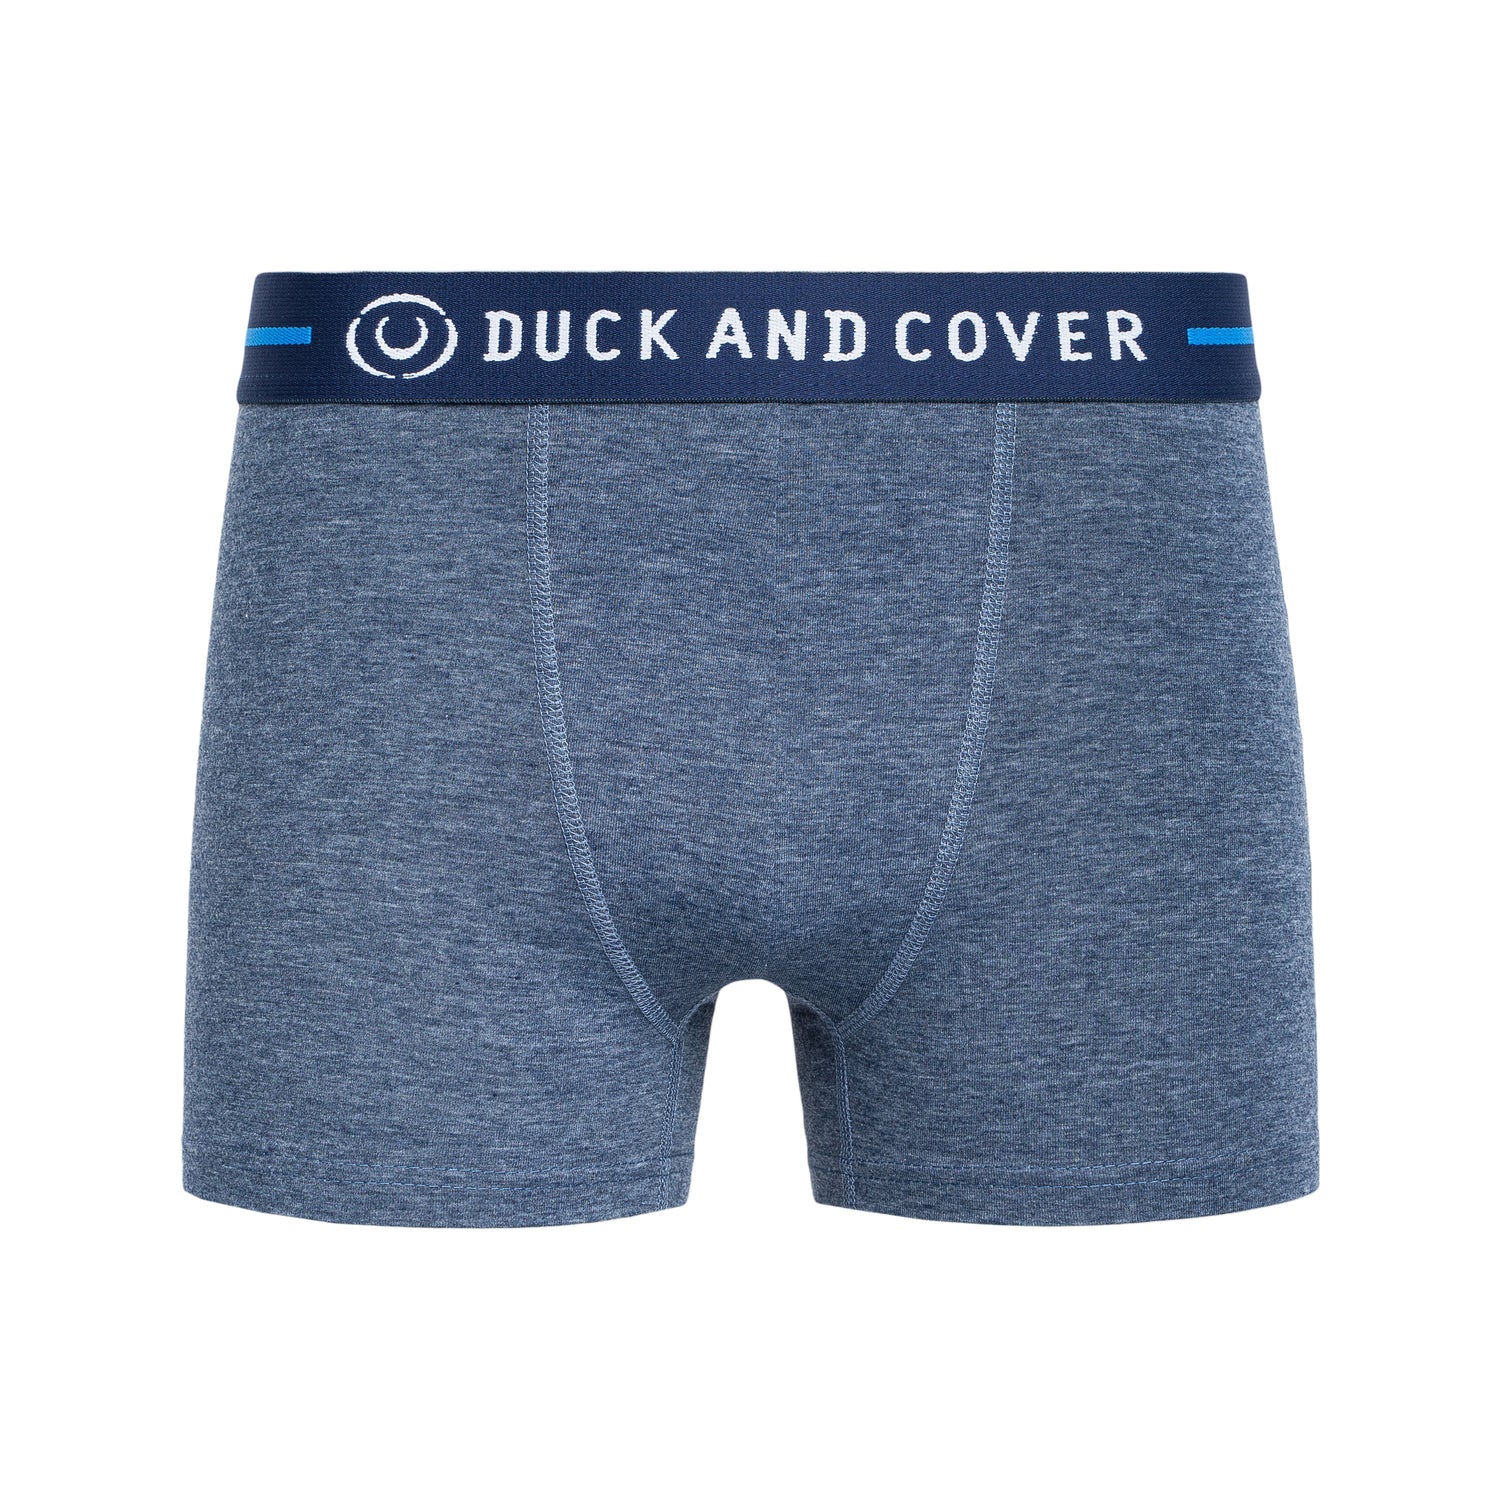 Mens Stamper 2 Boxer Shorts 3pk Navy Mix – Duck and Cover